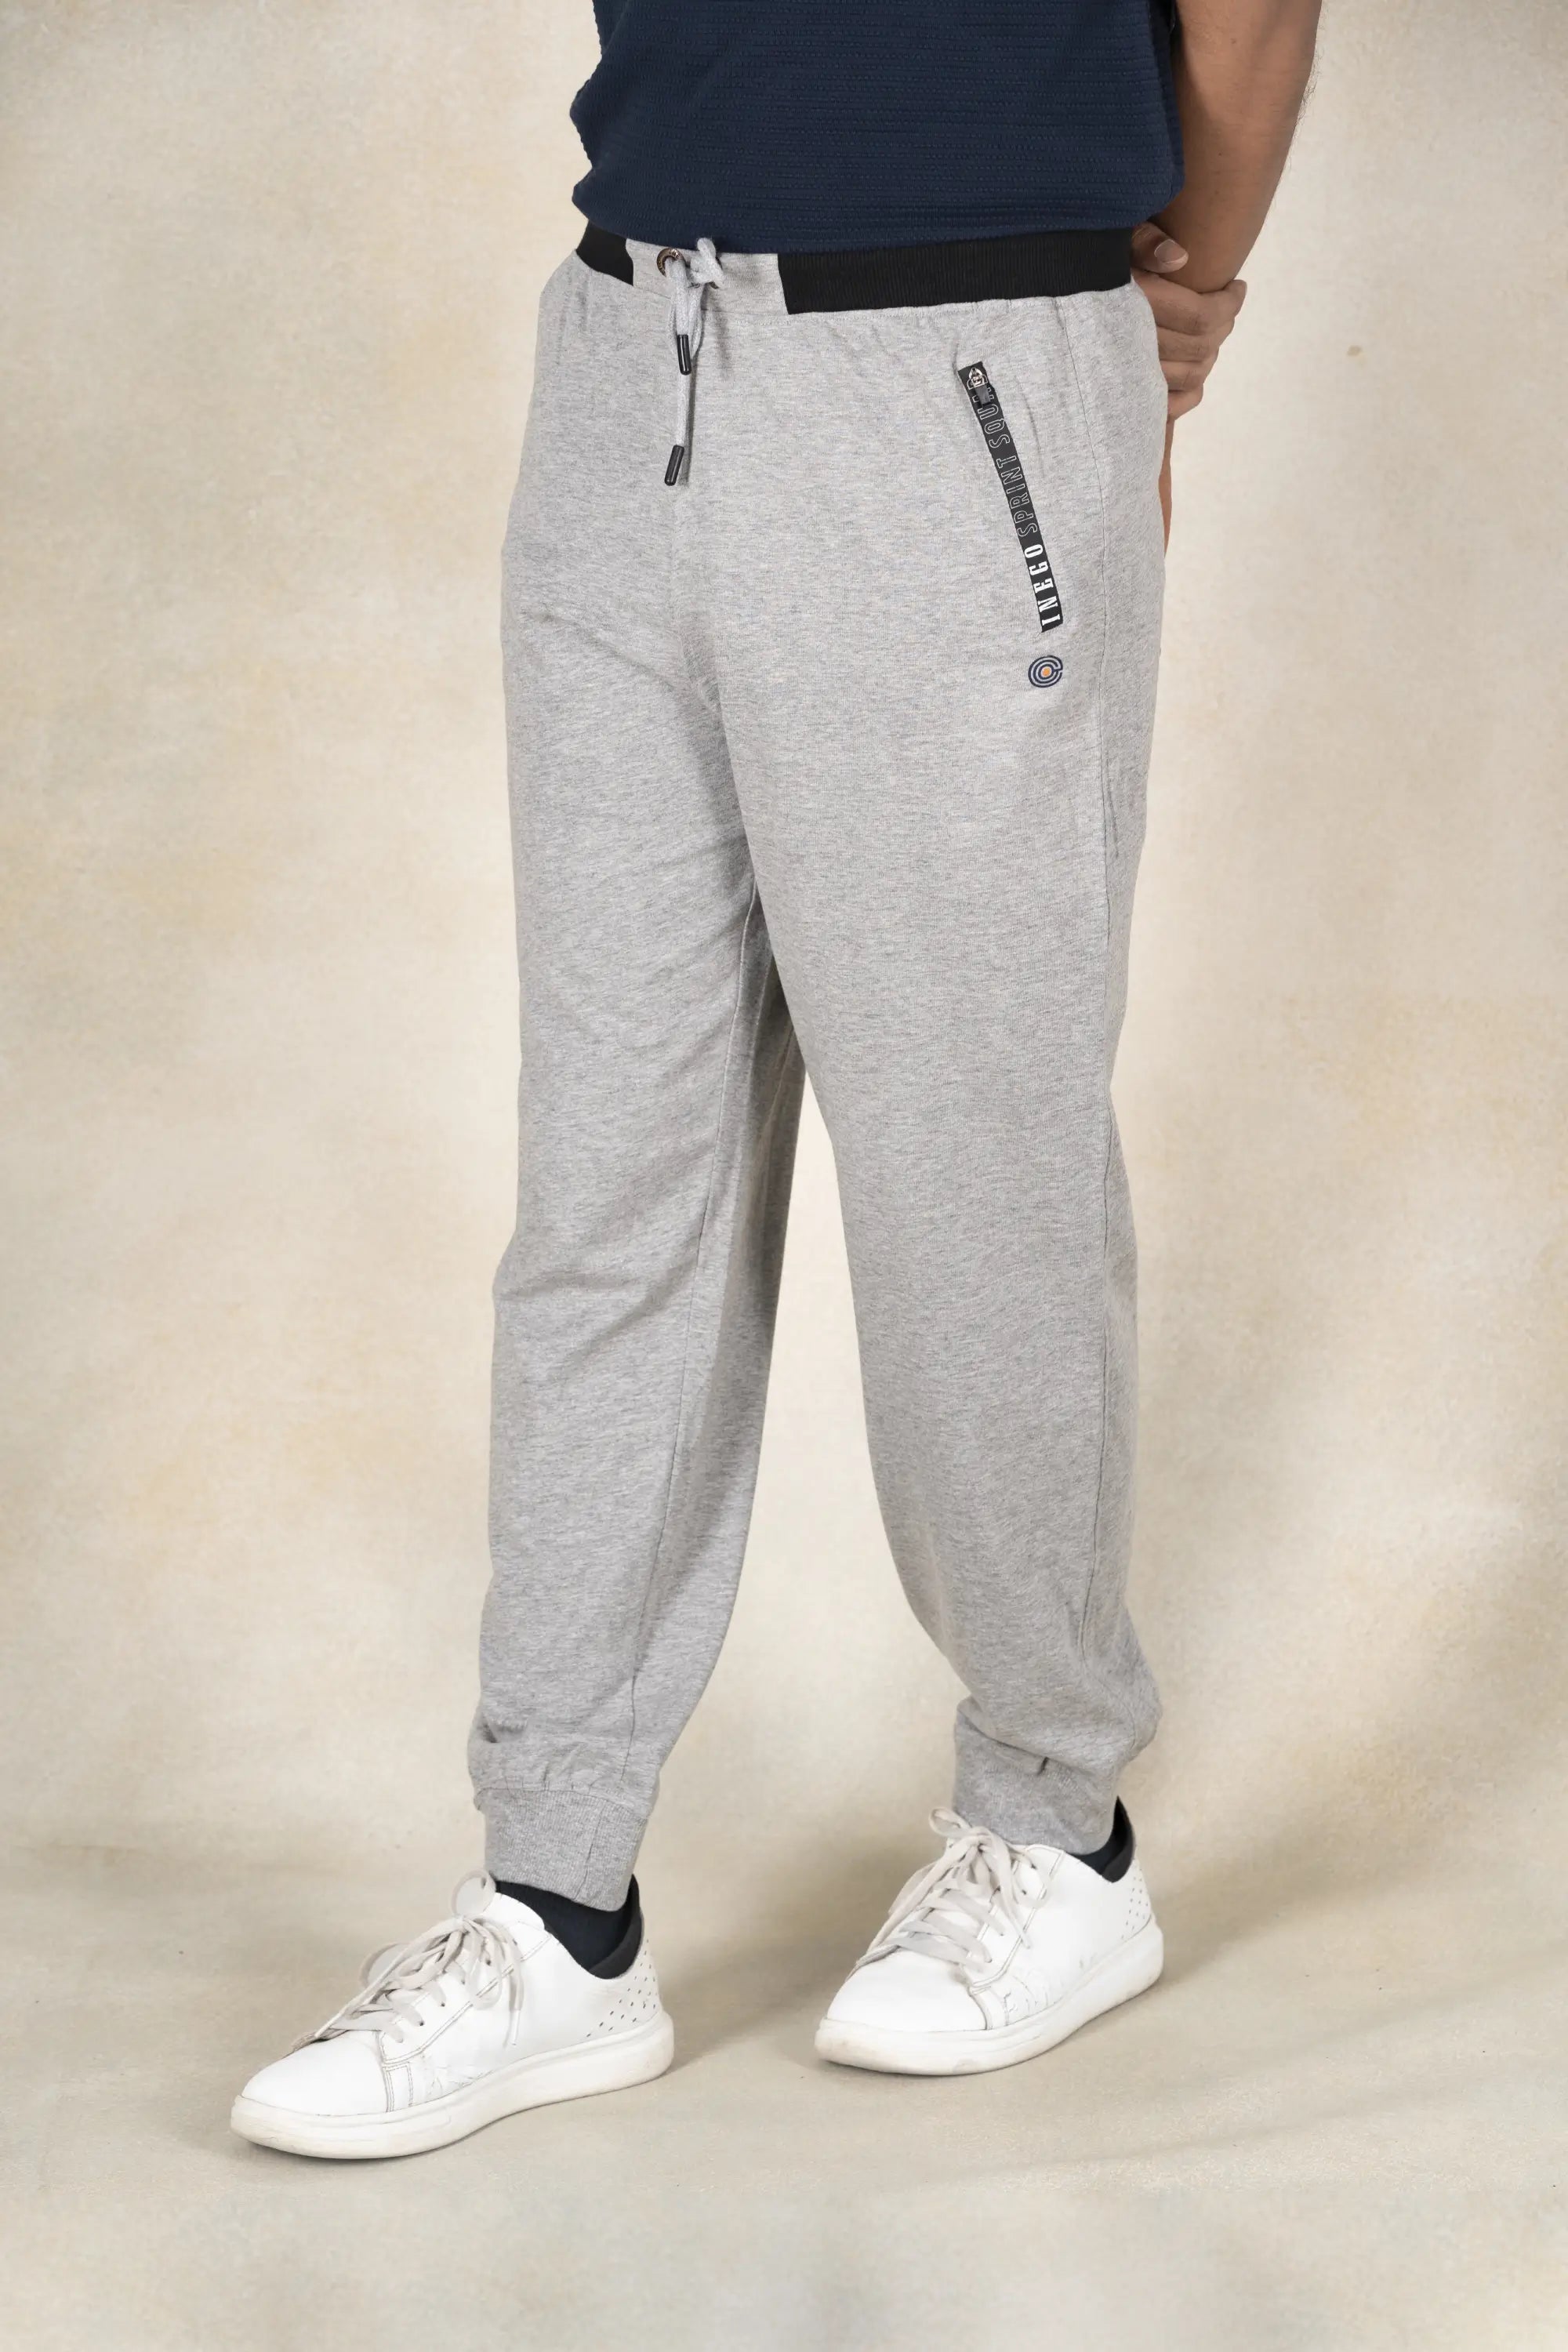 Buy Tee Town Trending Color Block Lower Track pants Joggers Pajama for Mens  Grey  track pants for mens  pants for men  joggers for men  joggers mens  Online at